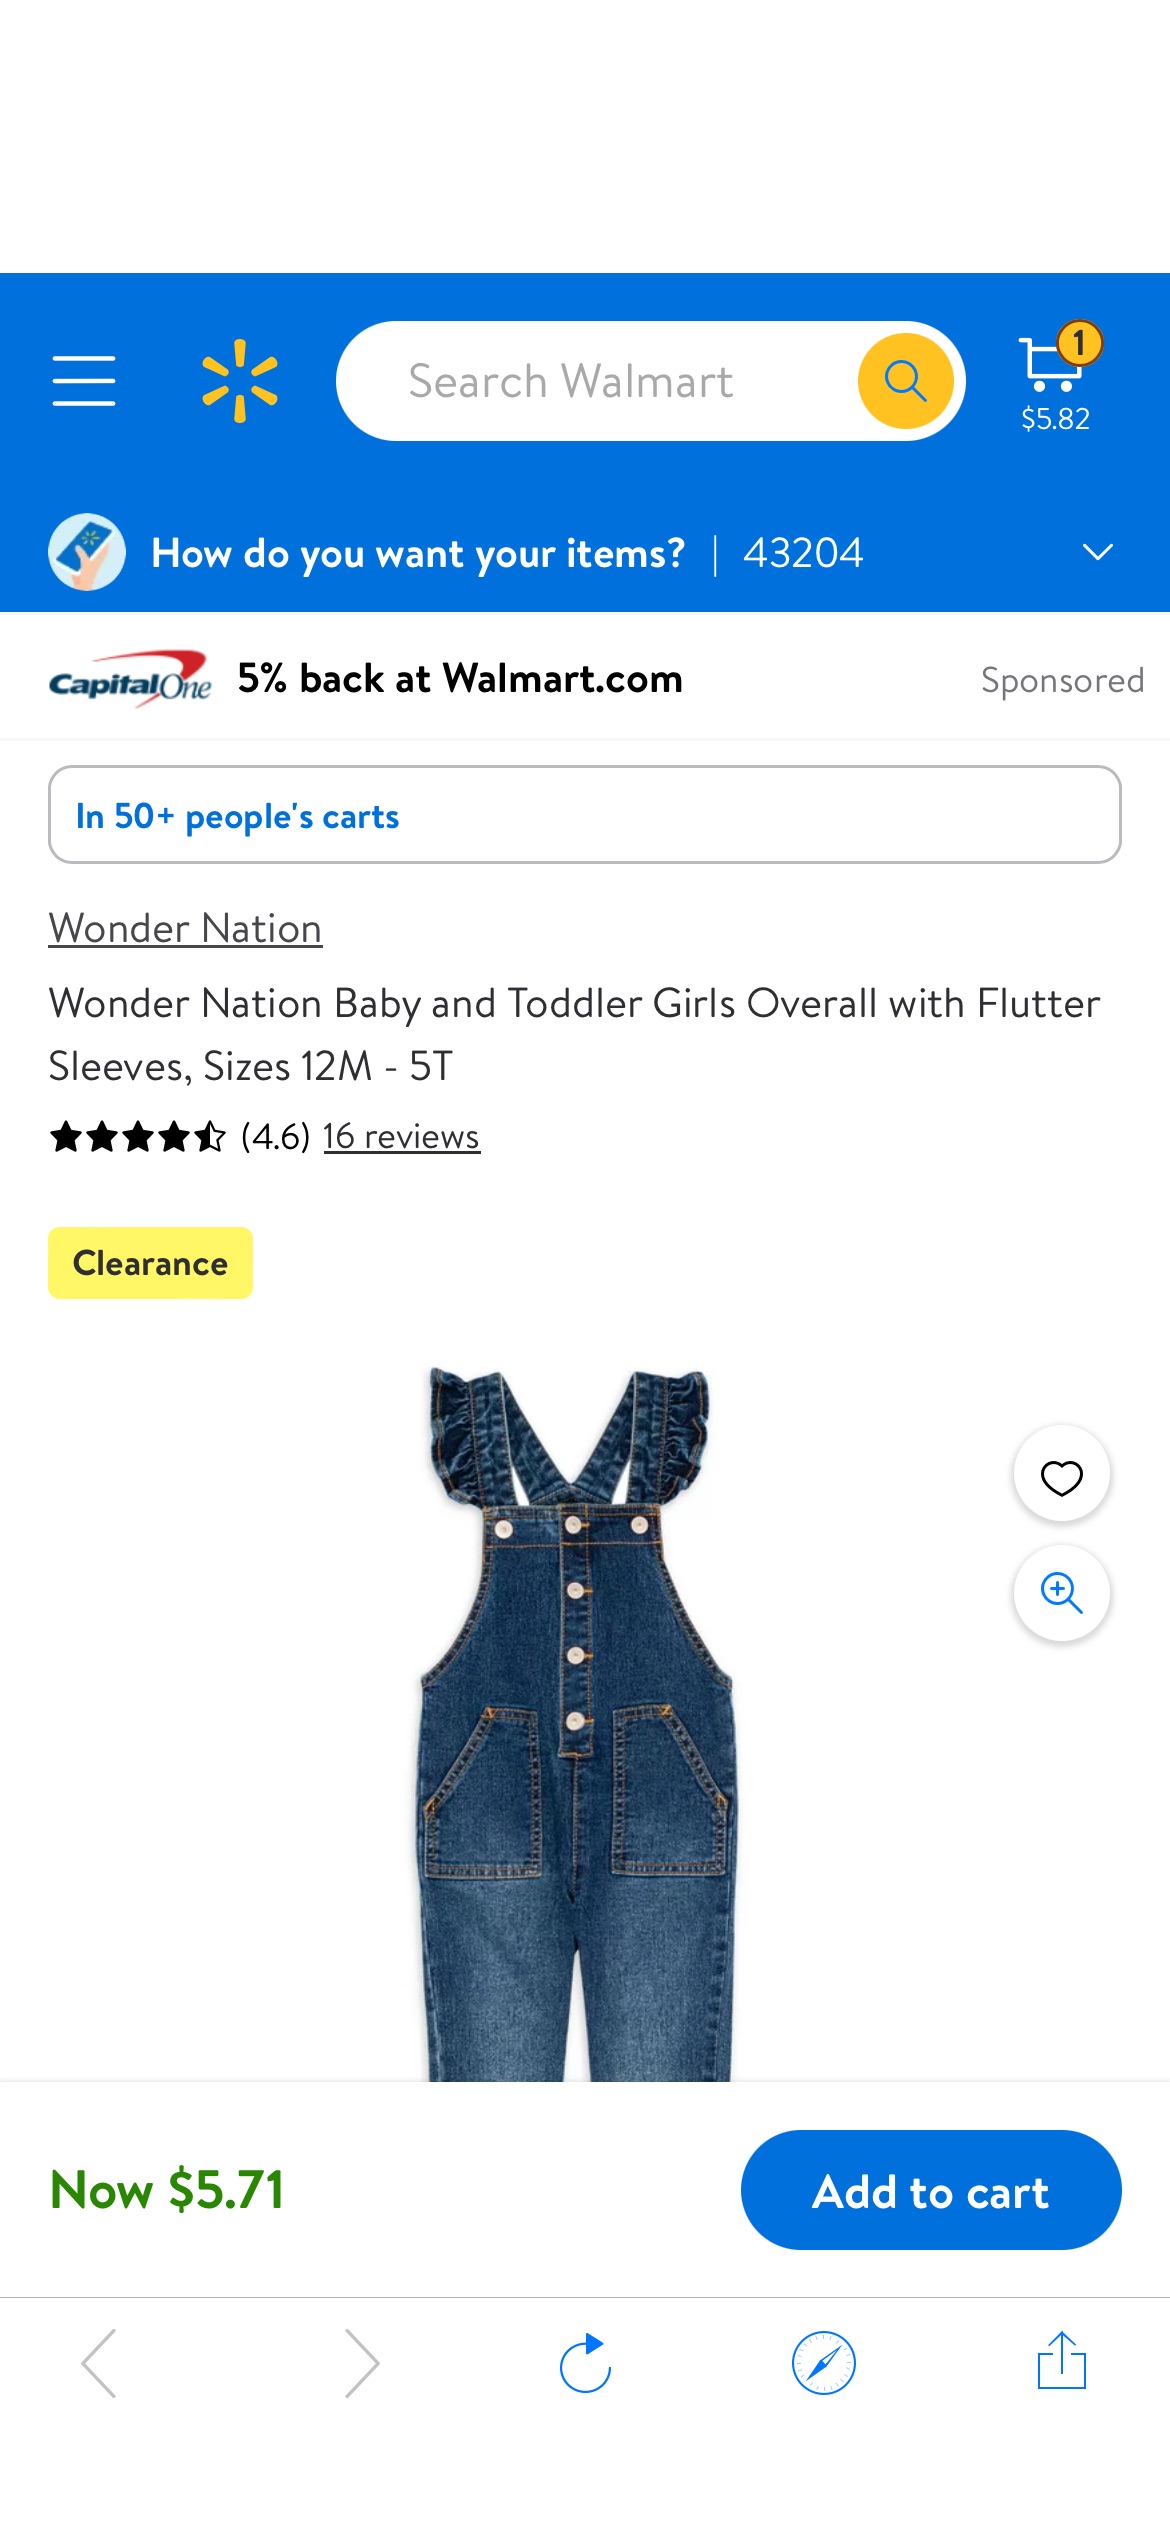 Wonder Nation Baby and Toddler Girls Overall with Flutter Sleeves, Sizes 12M - 5T - Walmart.com 女童连体牛仔裤